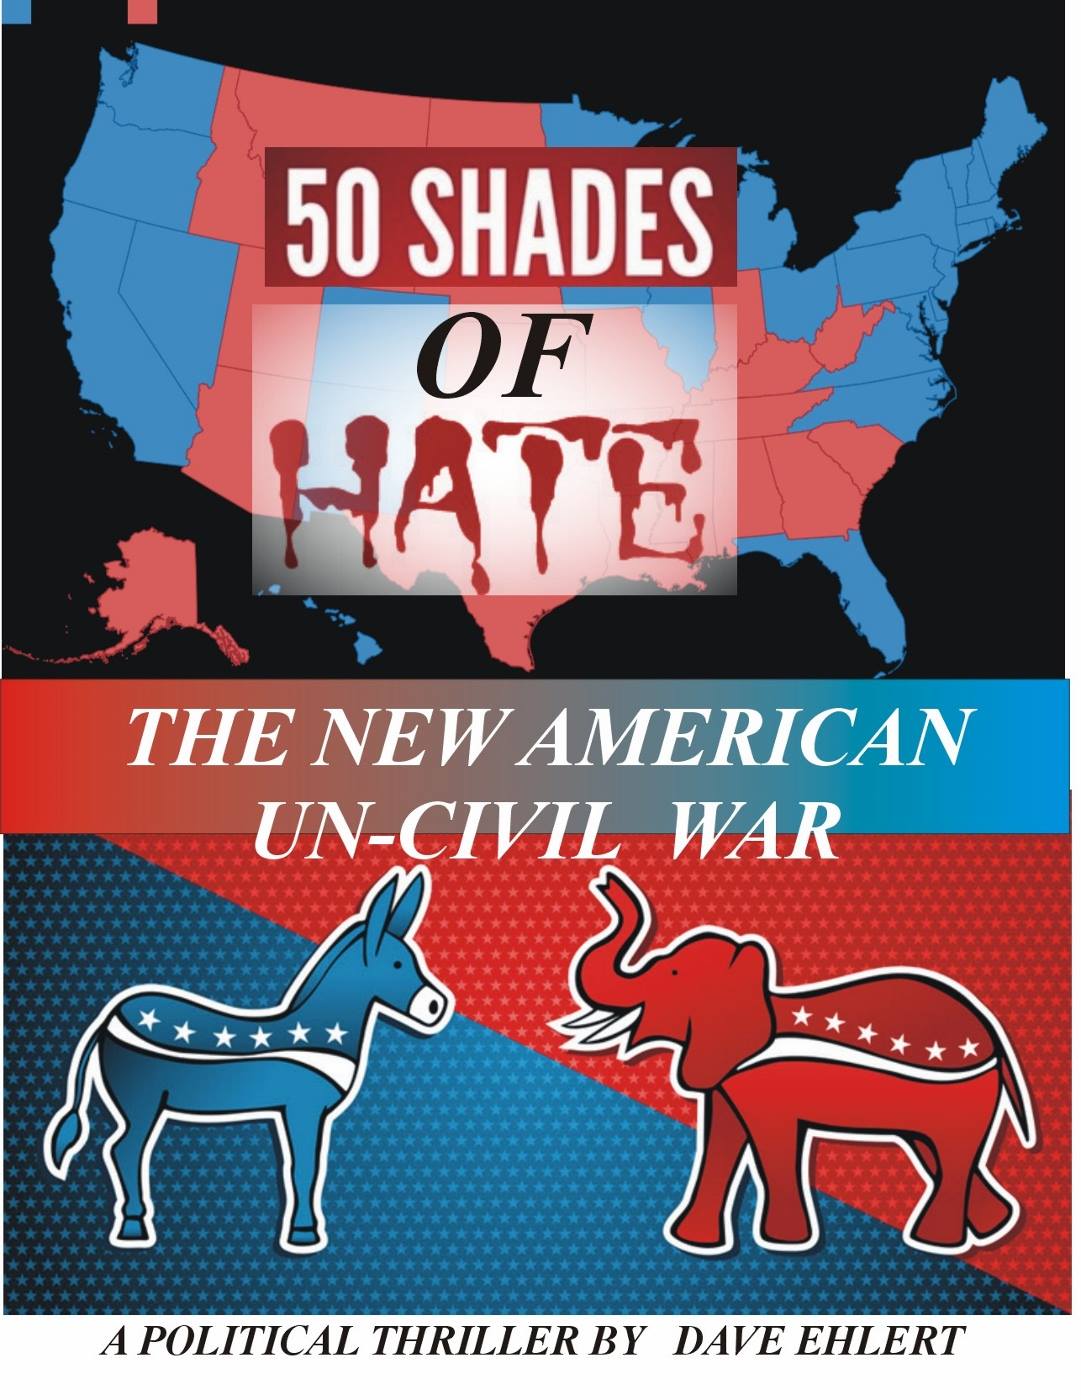 Shades of Hate Book Signing